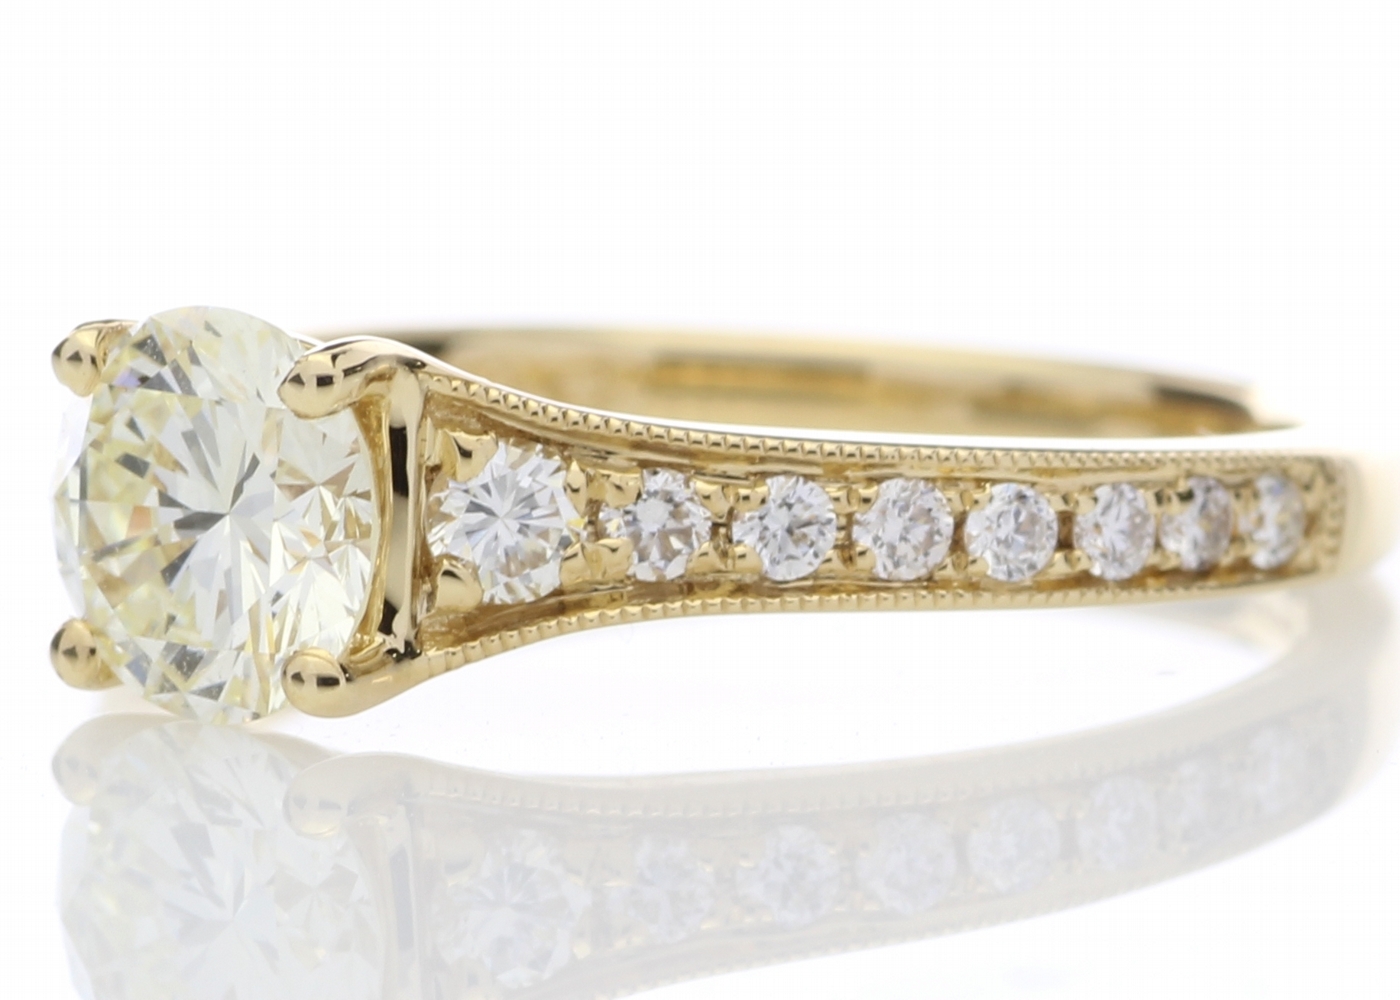 18ct Yellow Gold Single Stone Diamond Ring With Stone Set Shoulders (0.75) 1.06 Carats - Image 2 of 5